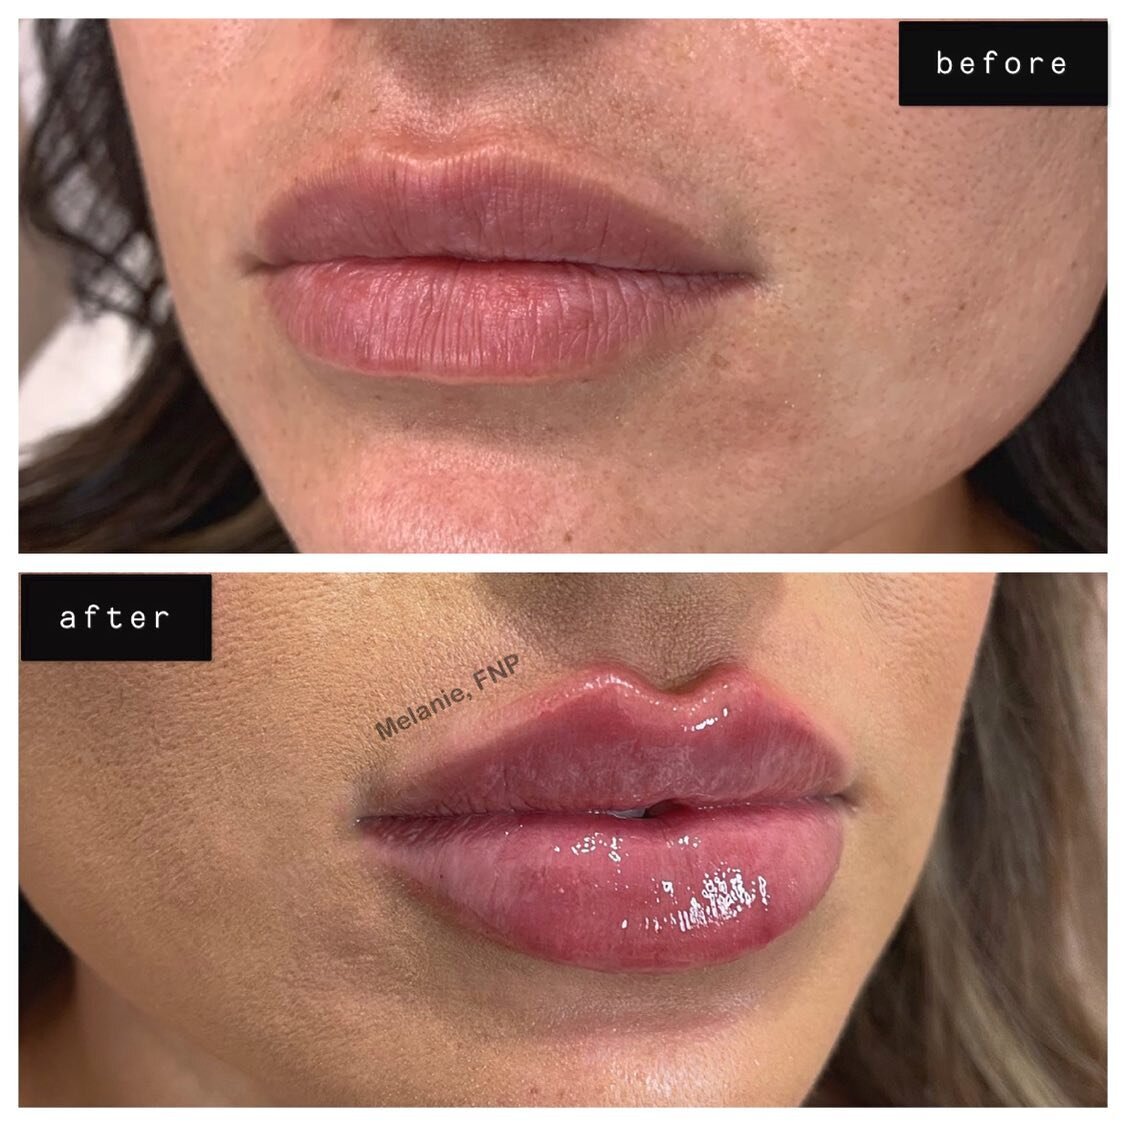 ✅RUSSIAN LIPS
✅BORDER REFINEMENT
✅KEYHOLE POUT

What do you guys think of these results?😻⬇️

#russianlips#Juvederm#Restylane#Voluma#Botox#Dysport#Kybella#aesthetics#dermalfiller#lipaugmentation#noseaugmentation#chinaugmentation#cheekenhancement#unde